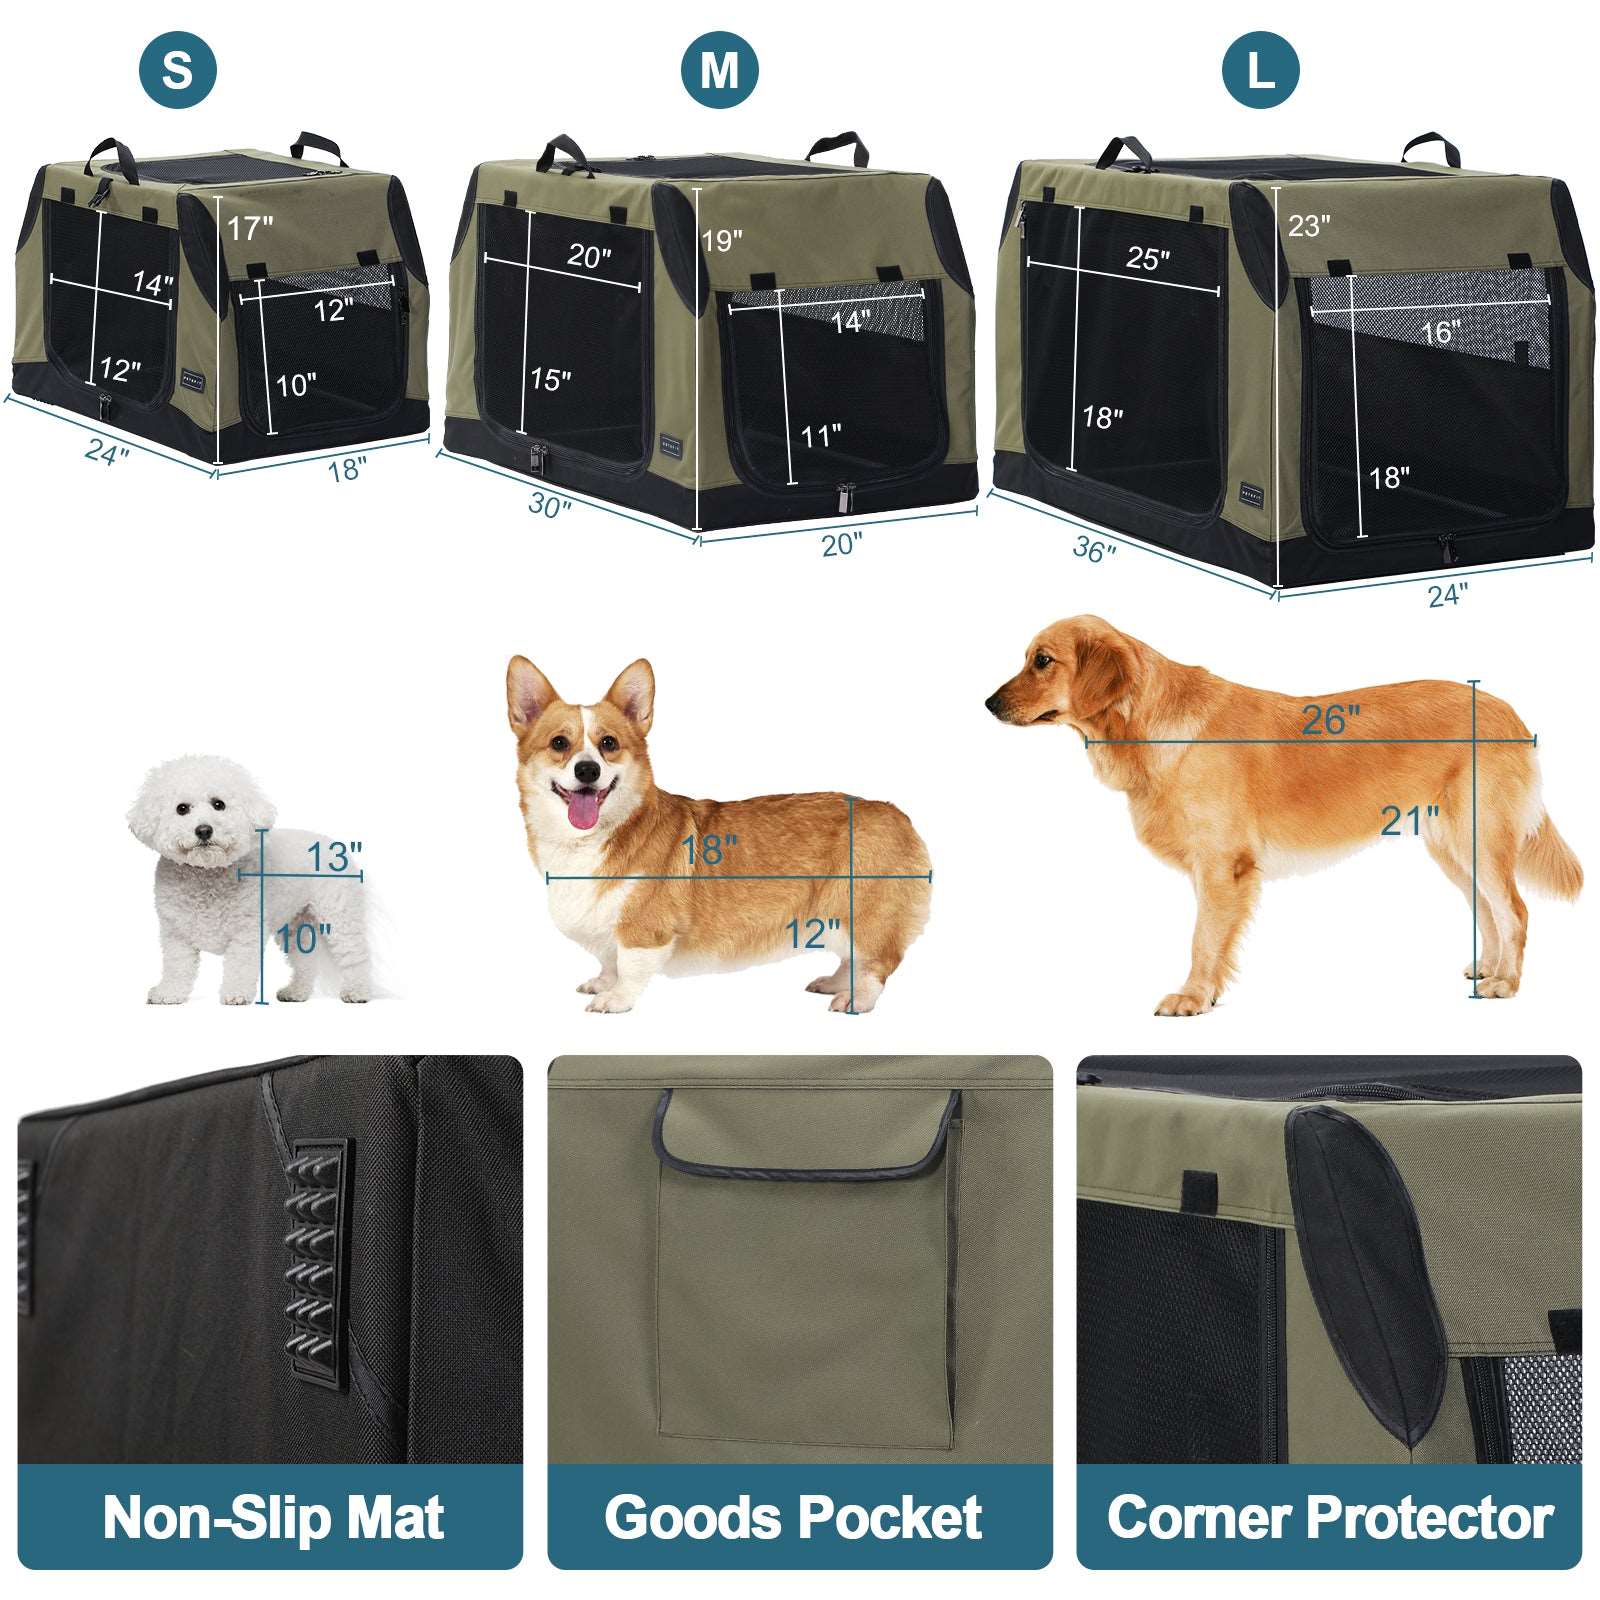 Petsfit-Soft-Sided-Portable-Travel-Kennel-for-Pet-07